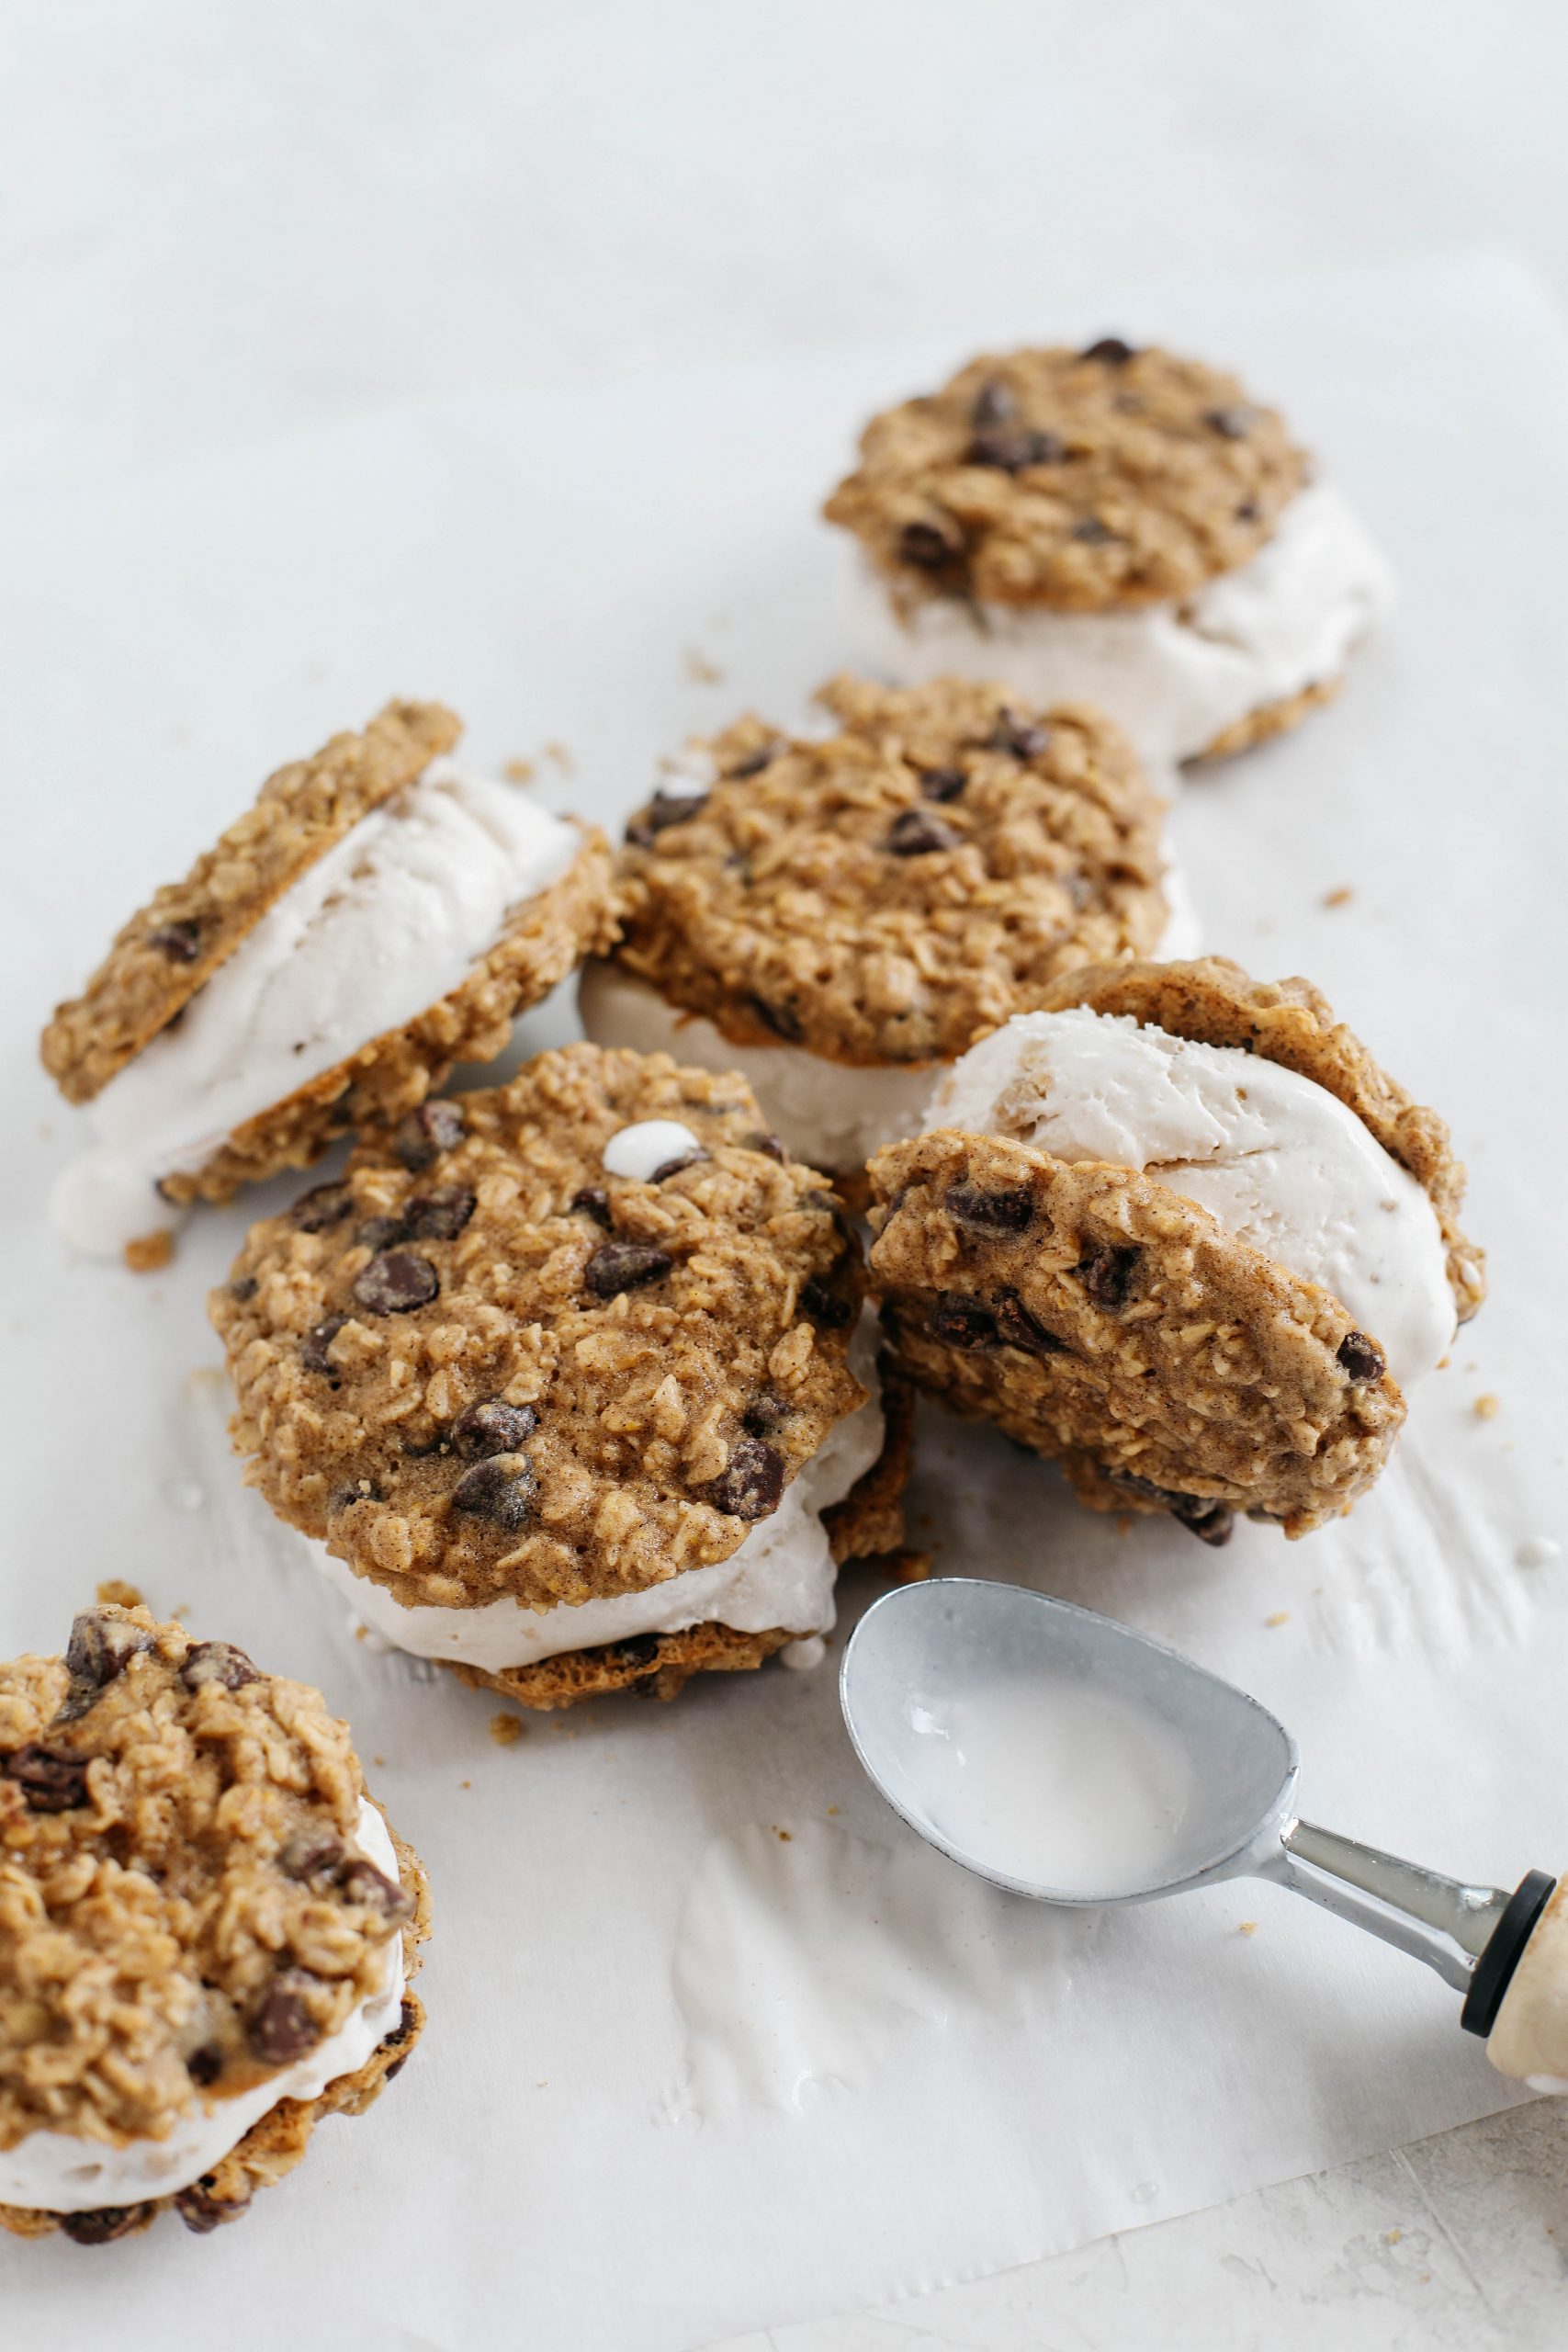 Celebrate the summer with these homemade oatmeal chocolate chip cookie ice cream sandwiches that are dairy-free, vegan and taste just like your childhood!